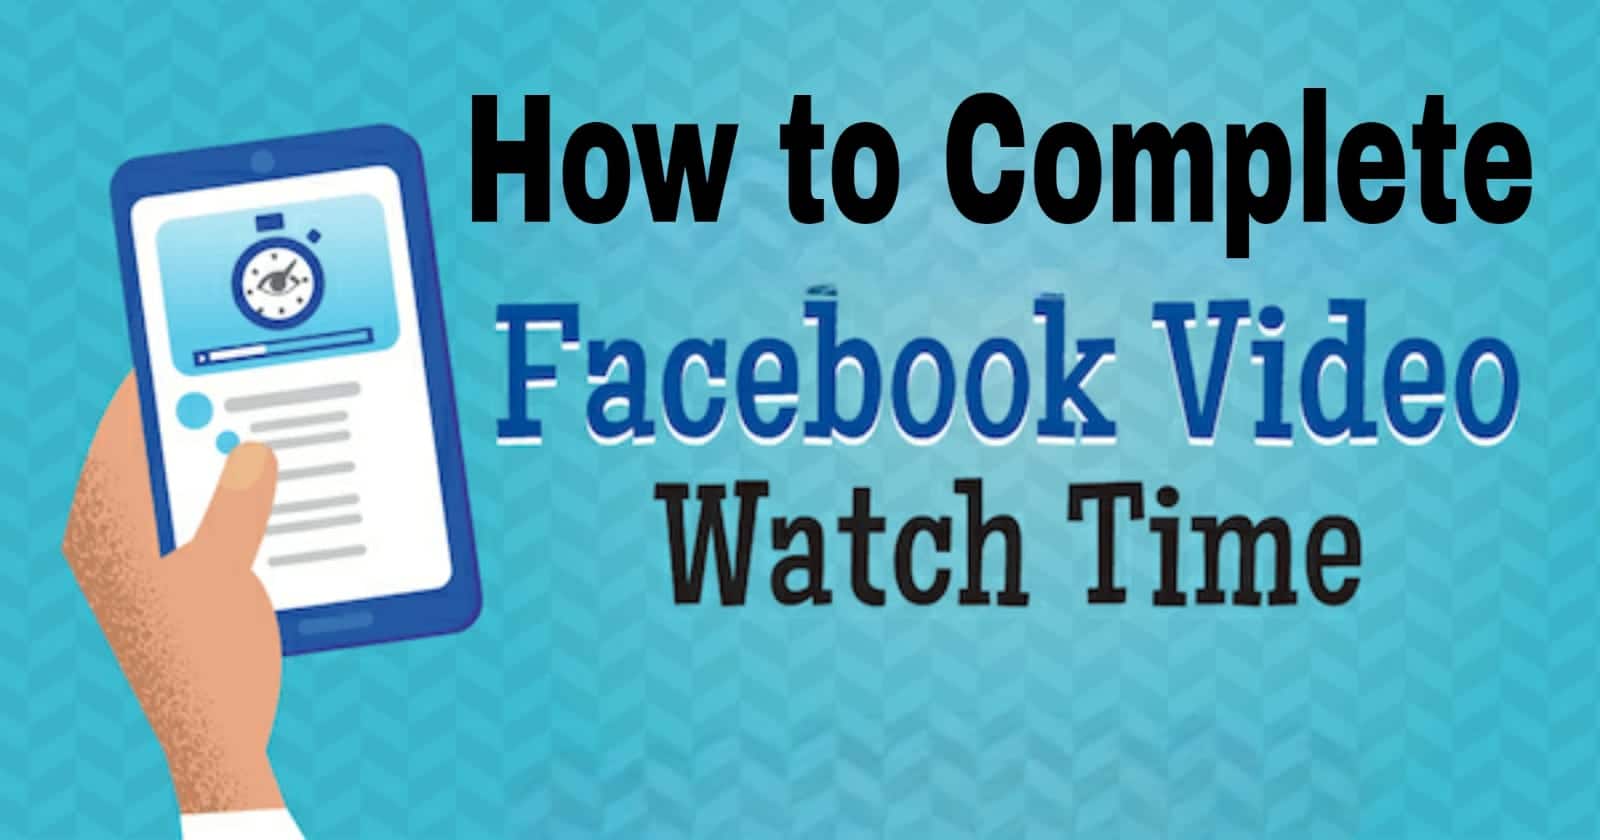 How to Complete 600k Facebook Watch Hours